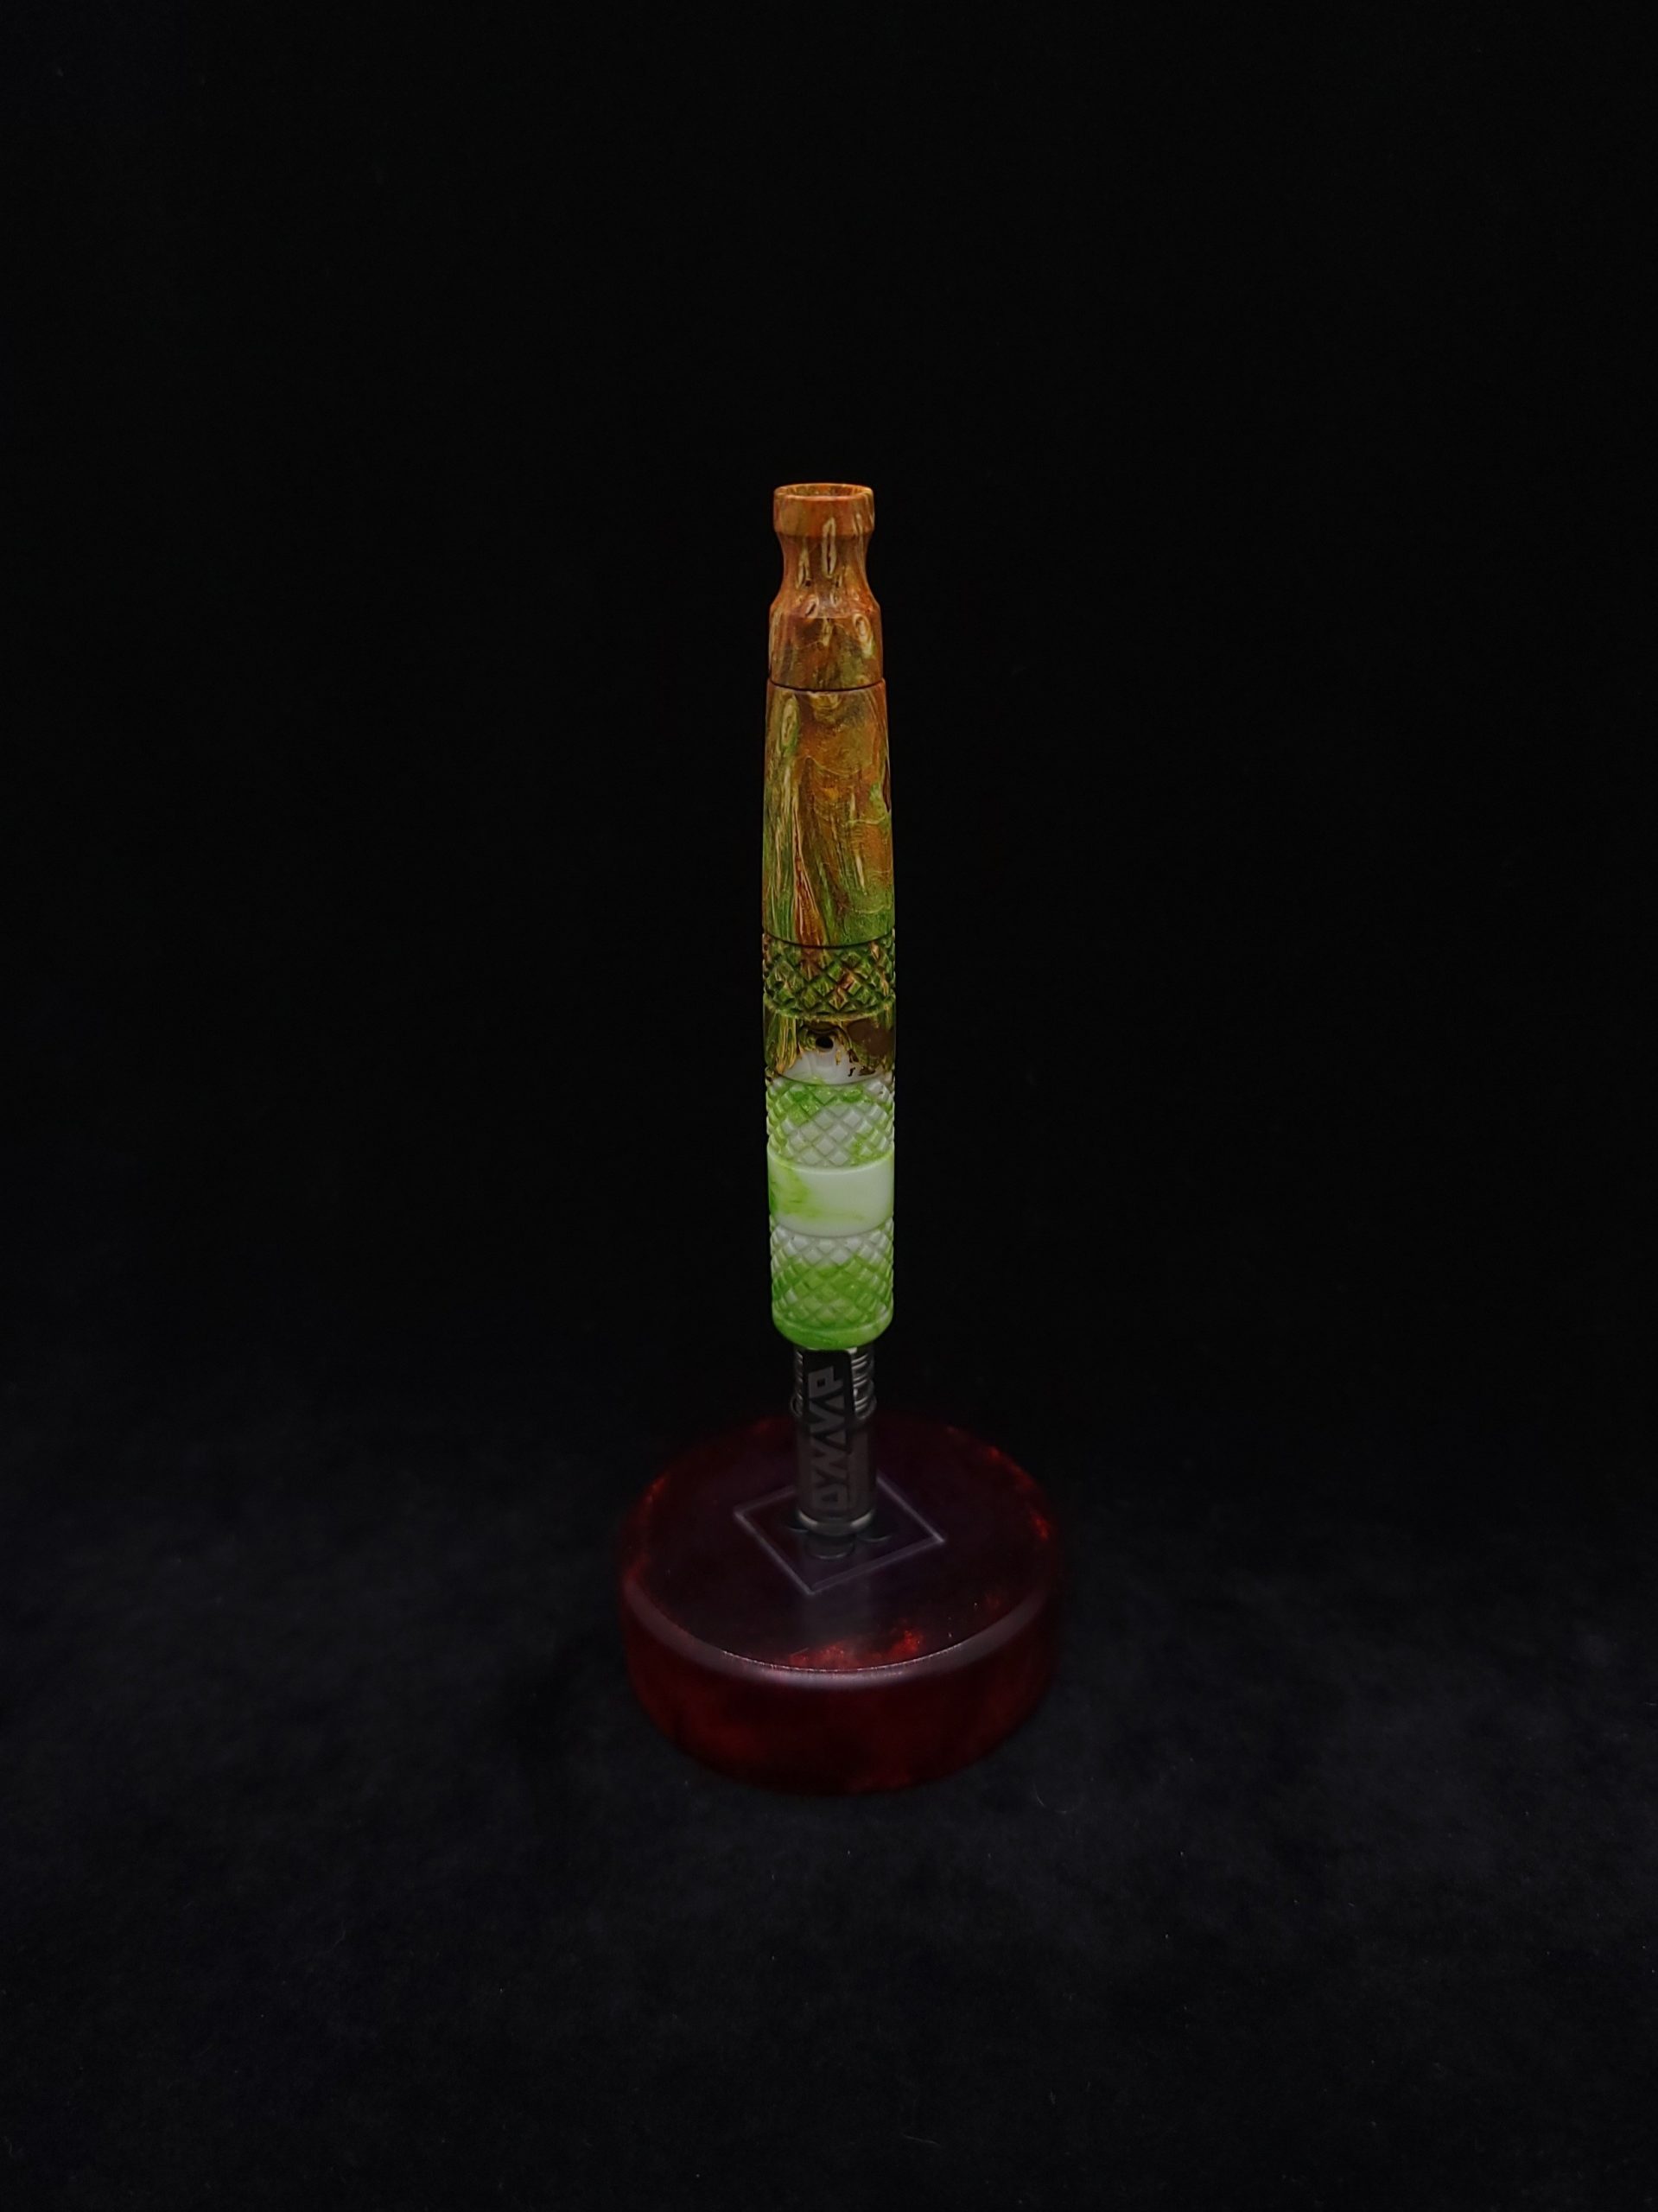 This image portrays High Class-Knurled XL Dynavap Stem/Luminescent Burl Hybrid + Matching M.P. by Dovetail Woodwork.